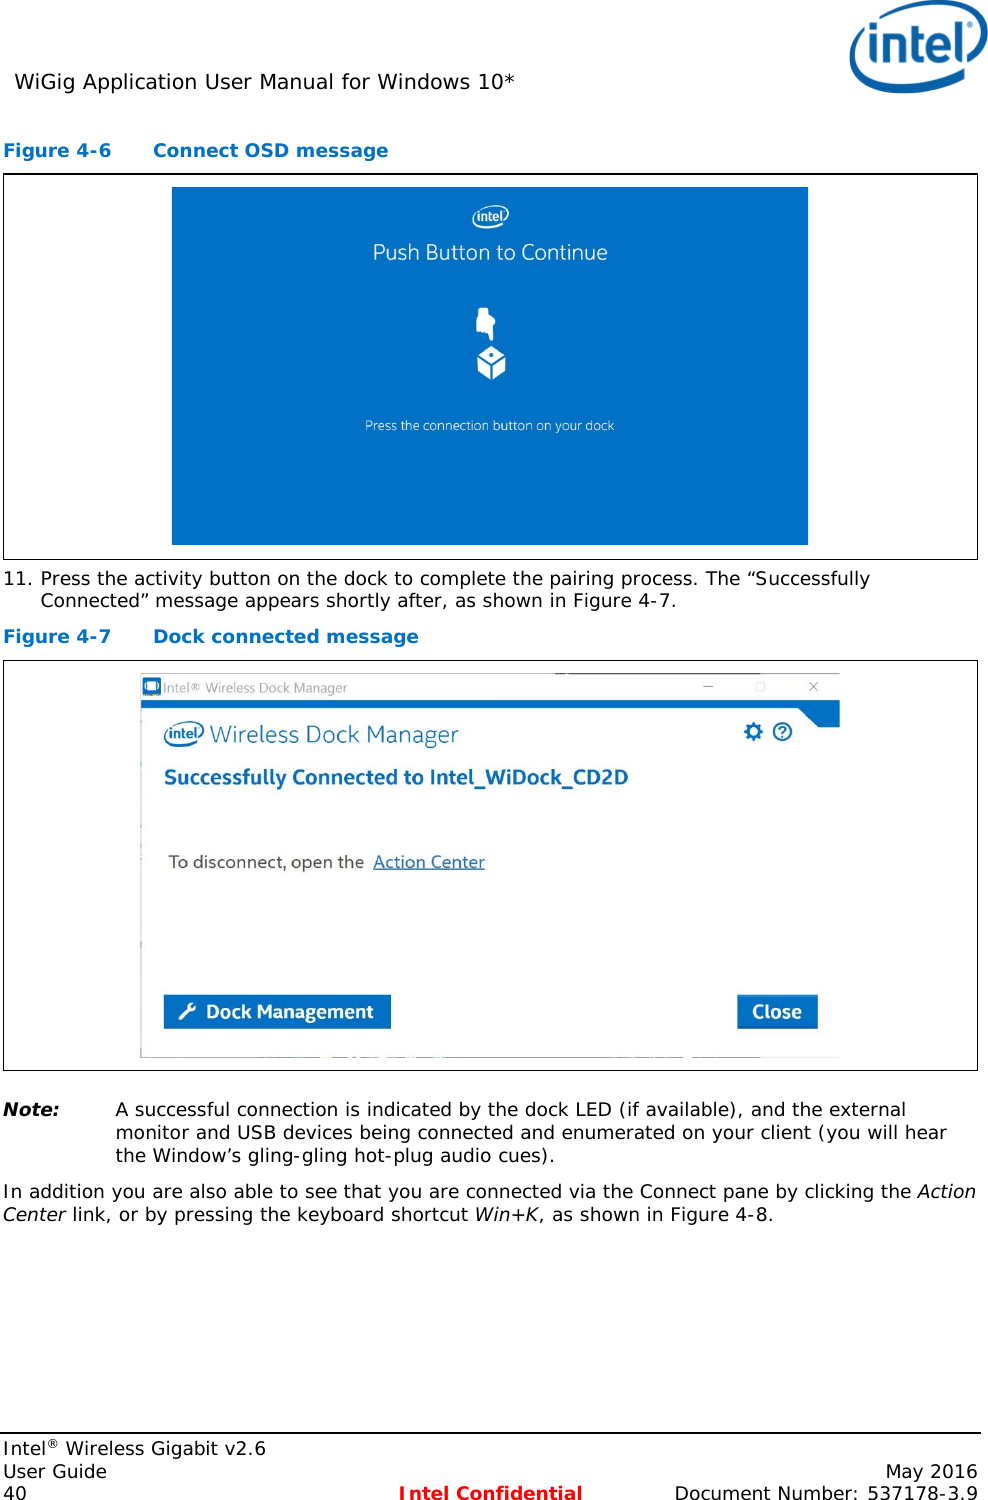 WiGig Application User Manual for Windows 10*    Intel® Wireless Gigabit v2.6 User Guide    May 2016 40 Intel Confidential Document Number: 537178-3.9 Figure 4-6  Connect OSD message  11. Press the activity button on the dock to complete the pairing process. The “Successfully Connected” message appears shortly after, as shown in Figure 4-7. Figure 4-7  Dock connected message  Note: A successful connection is indicated by the dock LED (if available), and the external monitor and USB devices being connected and enumerated on your client (you will hear the Window’s gling-gling hot-plug audio cues). In addition you are also able to see that you are connected via the Connect pane by clicking the Action Center link, or by pressing the keyboard shortcut Win+K, as shown in Figure 4-8. 